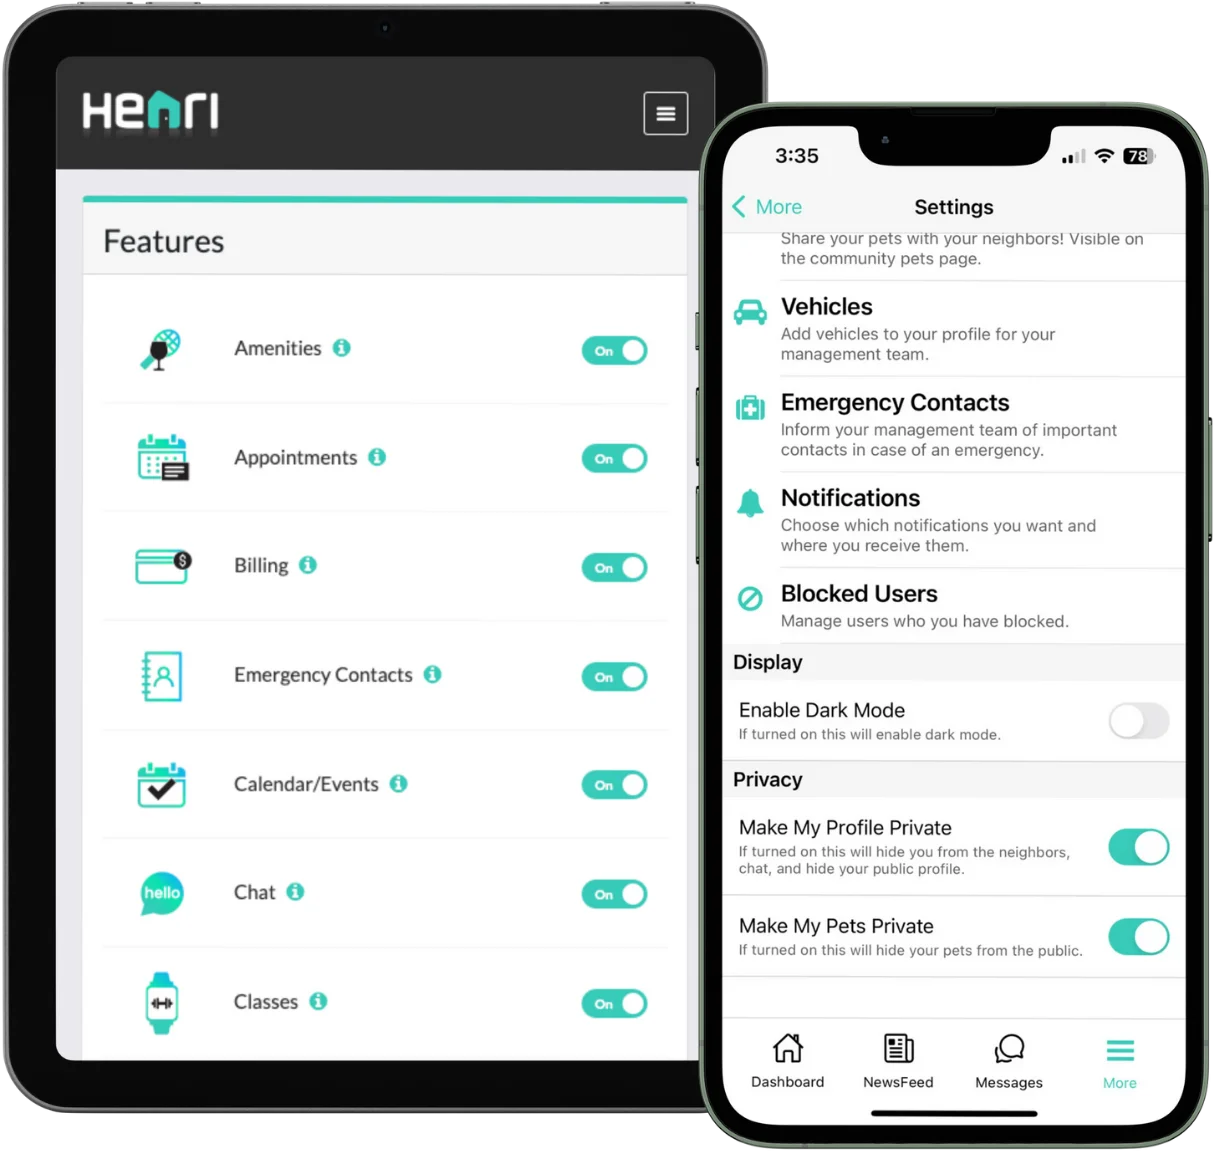 Tablet and mobile devices showing Henri's customizable settings feature